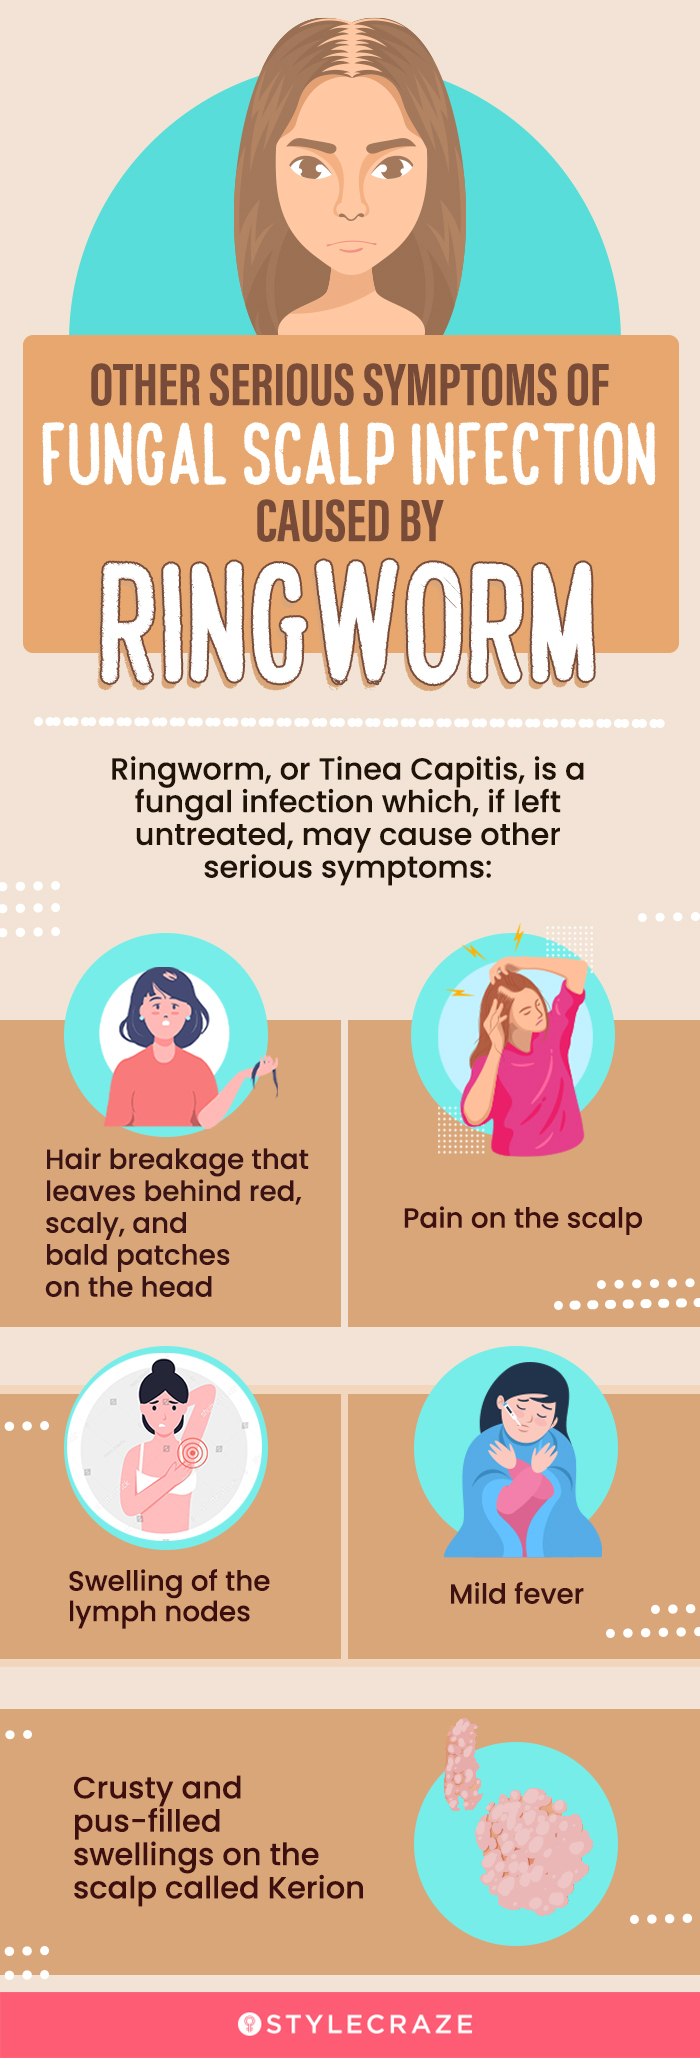 other serious symptoms of fungal scalp infection caused by ringworm (infographic)